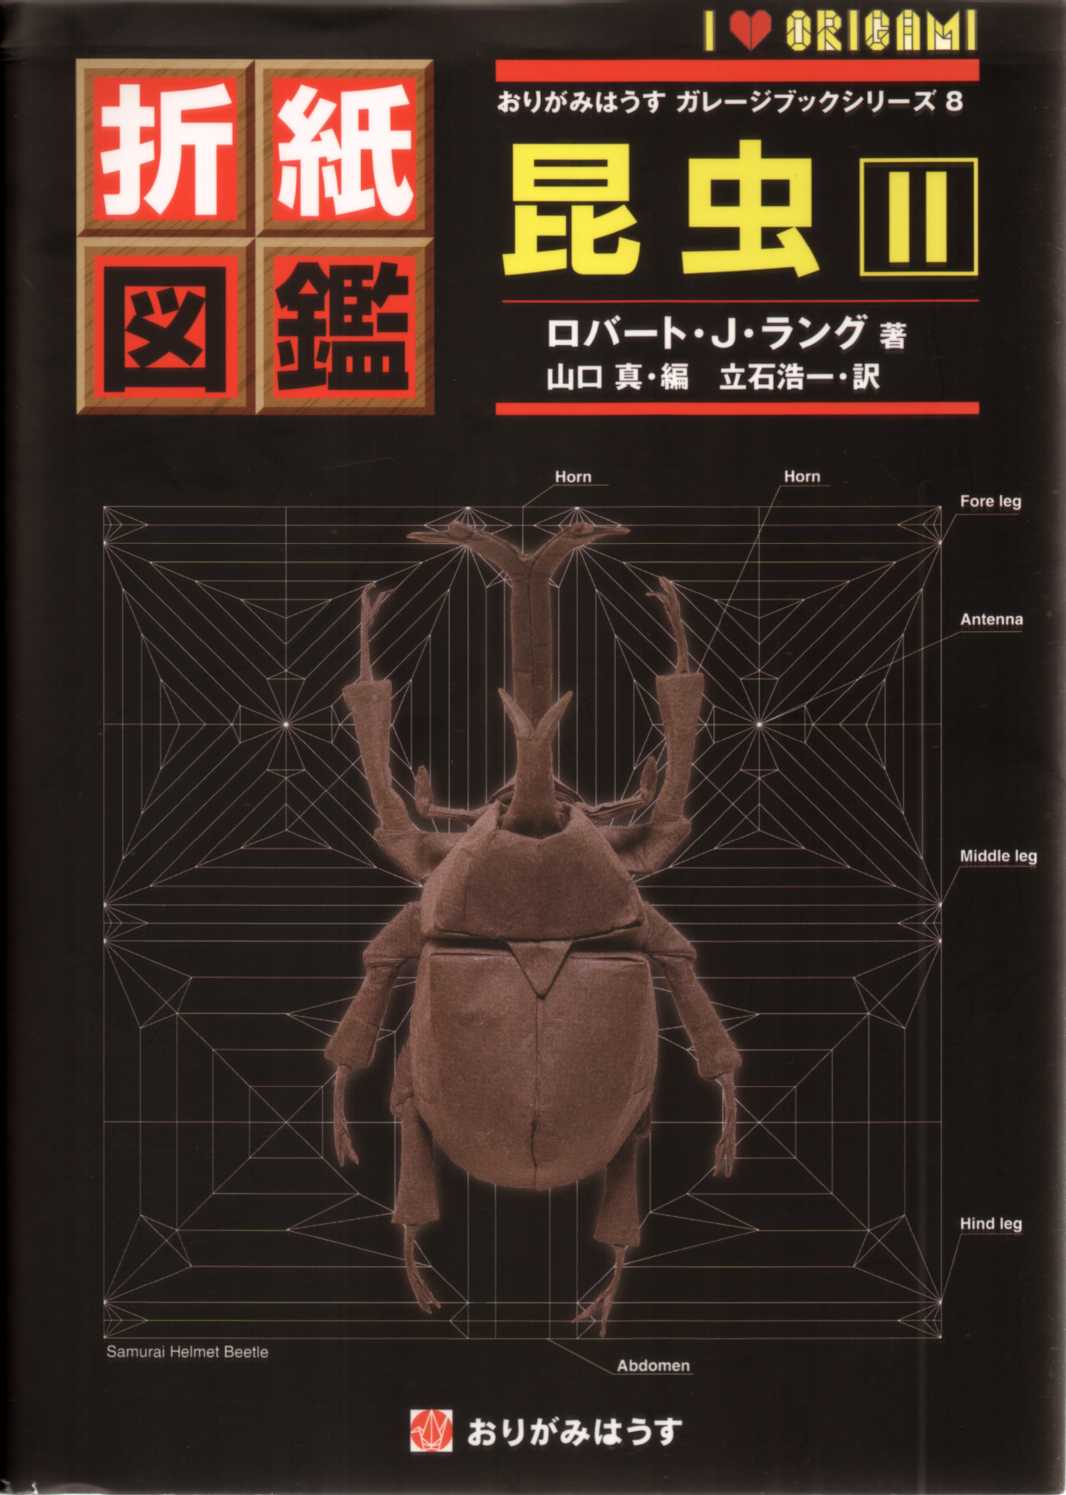 Origami Insects II / 折紙図鑑　昆虫・2 : page 56.